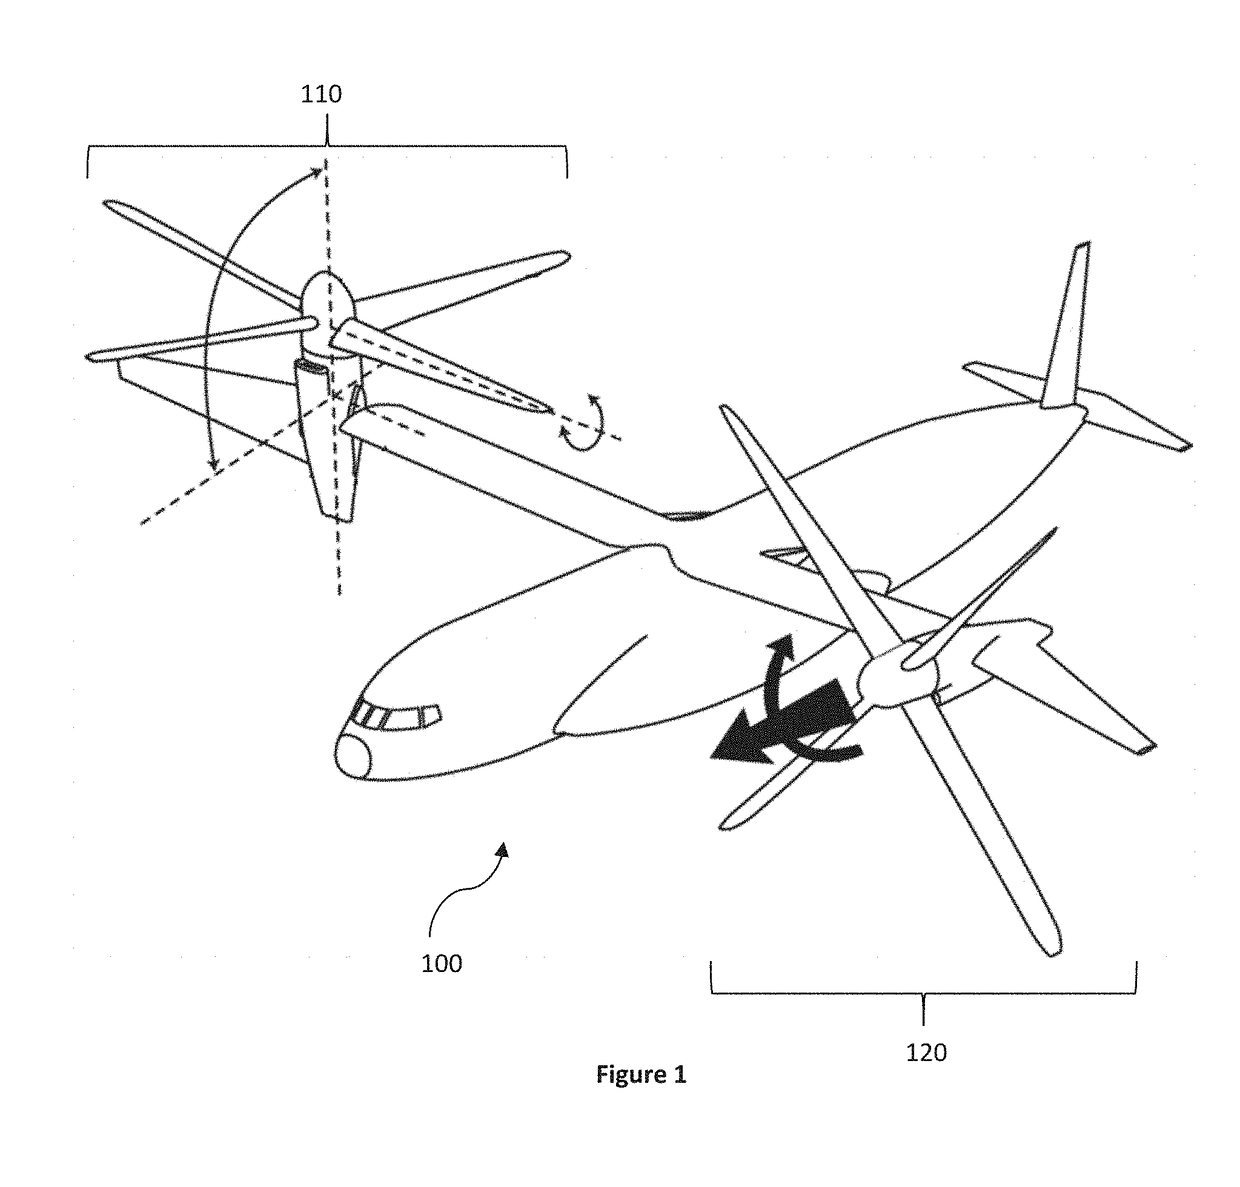 Use of individual blade control on a propeller or rotor in axial flight for the purpose of aerodynamic braking and power response modulation